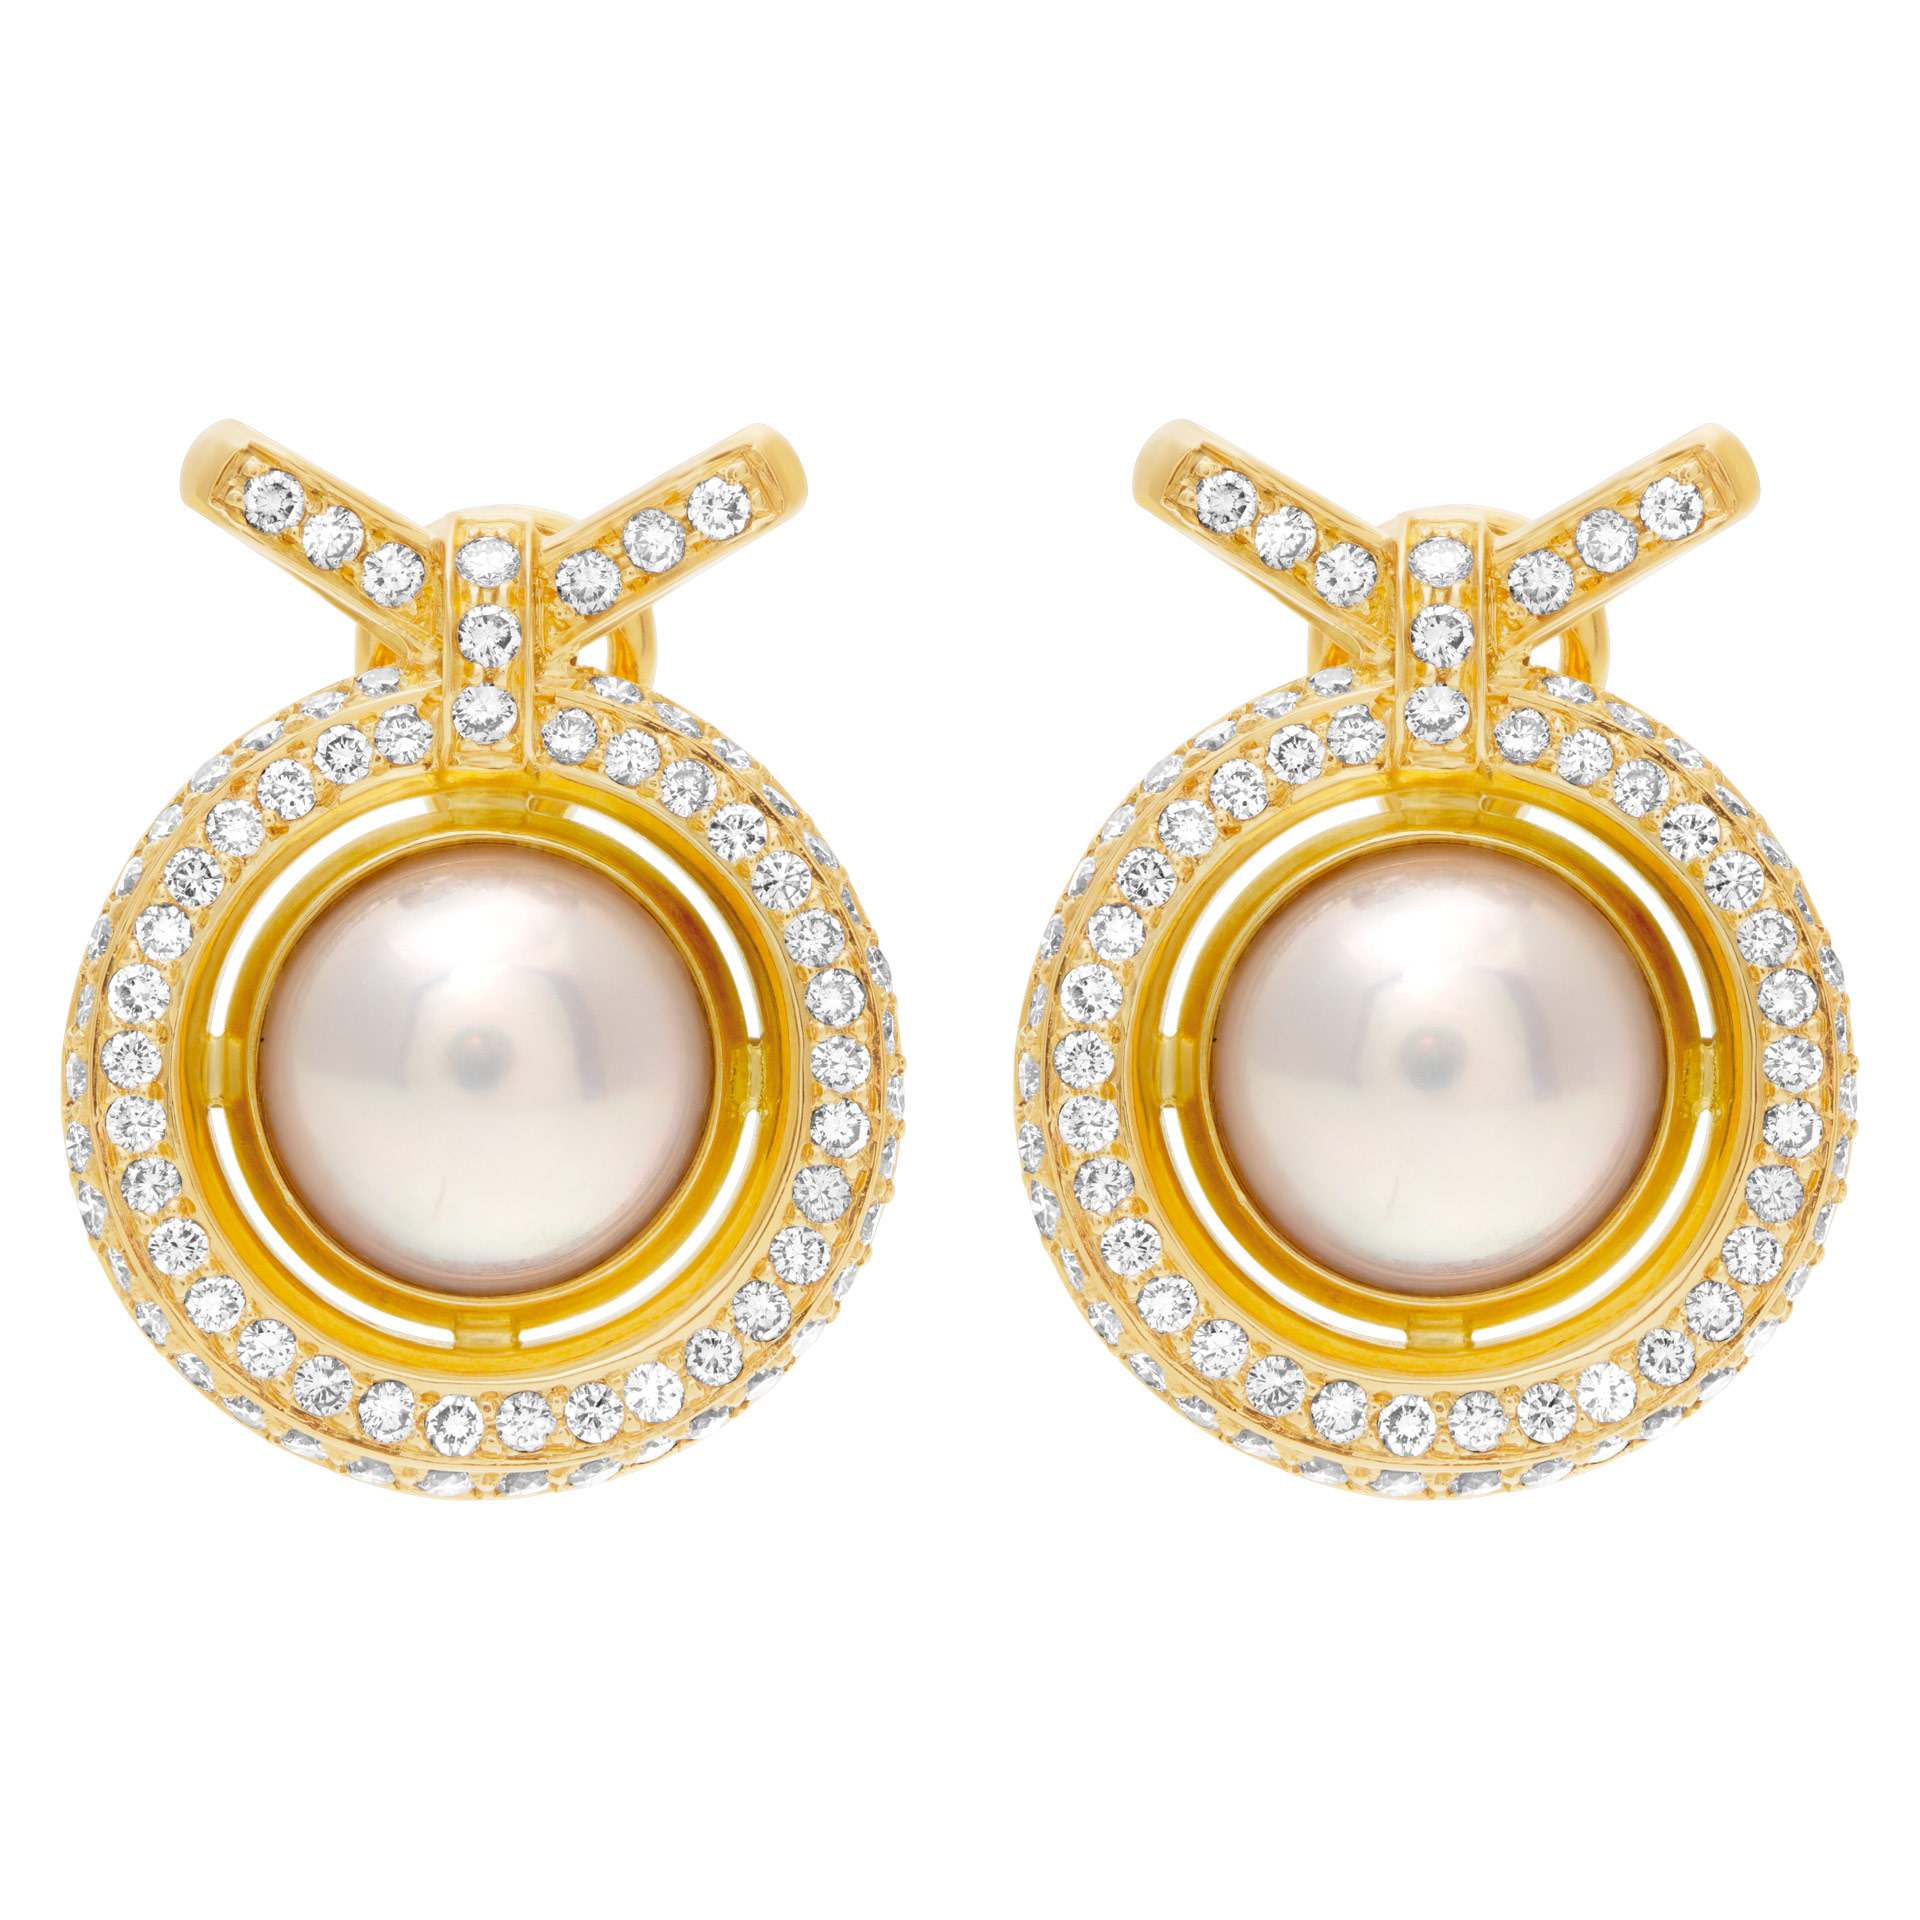 Button pearl earrings with pave diamonds in 18k image 1